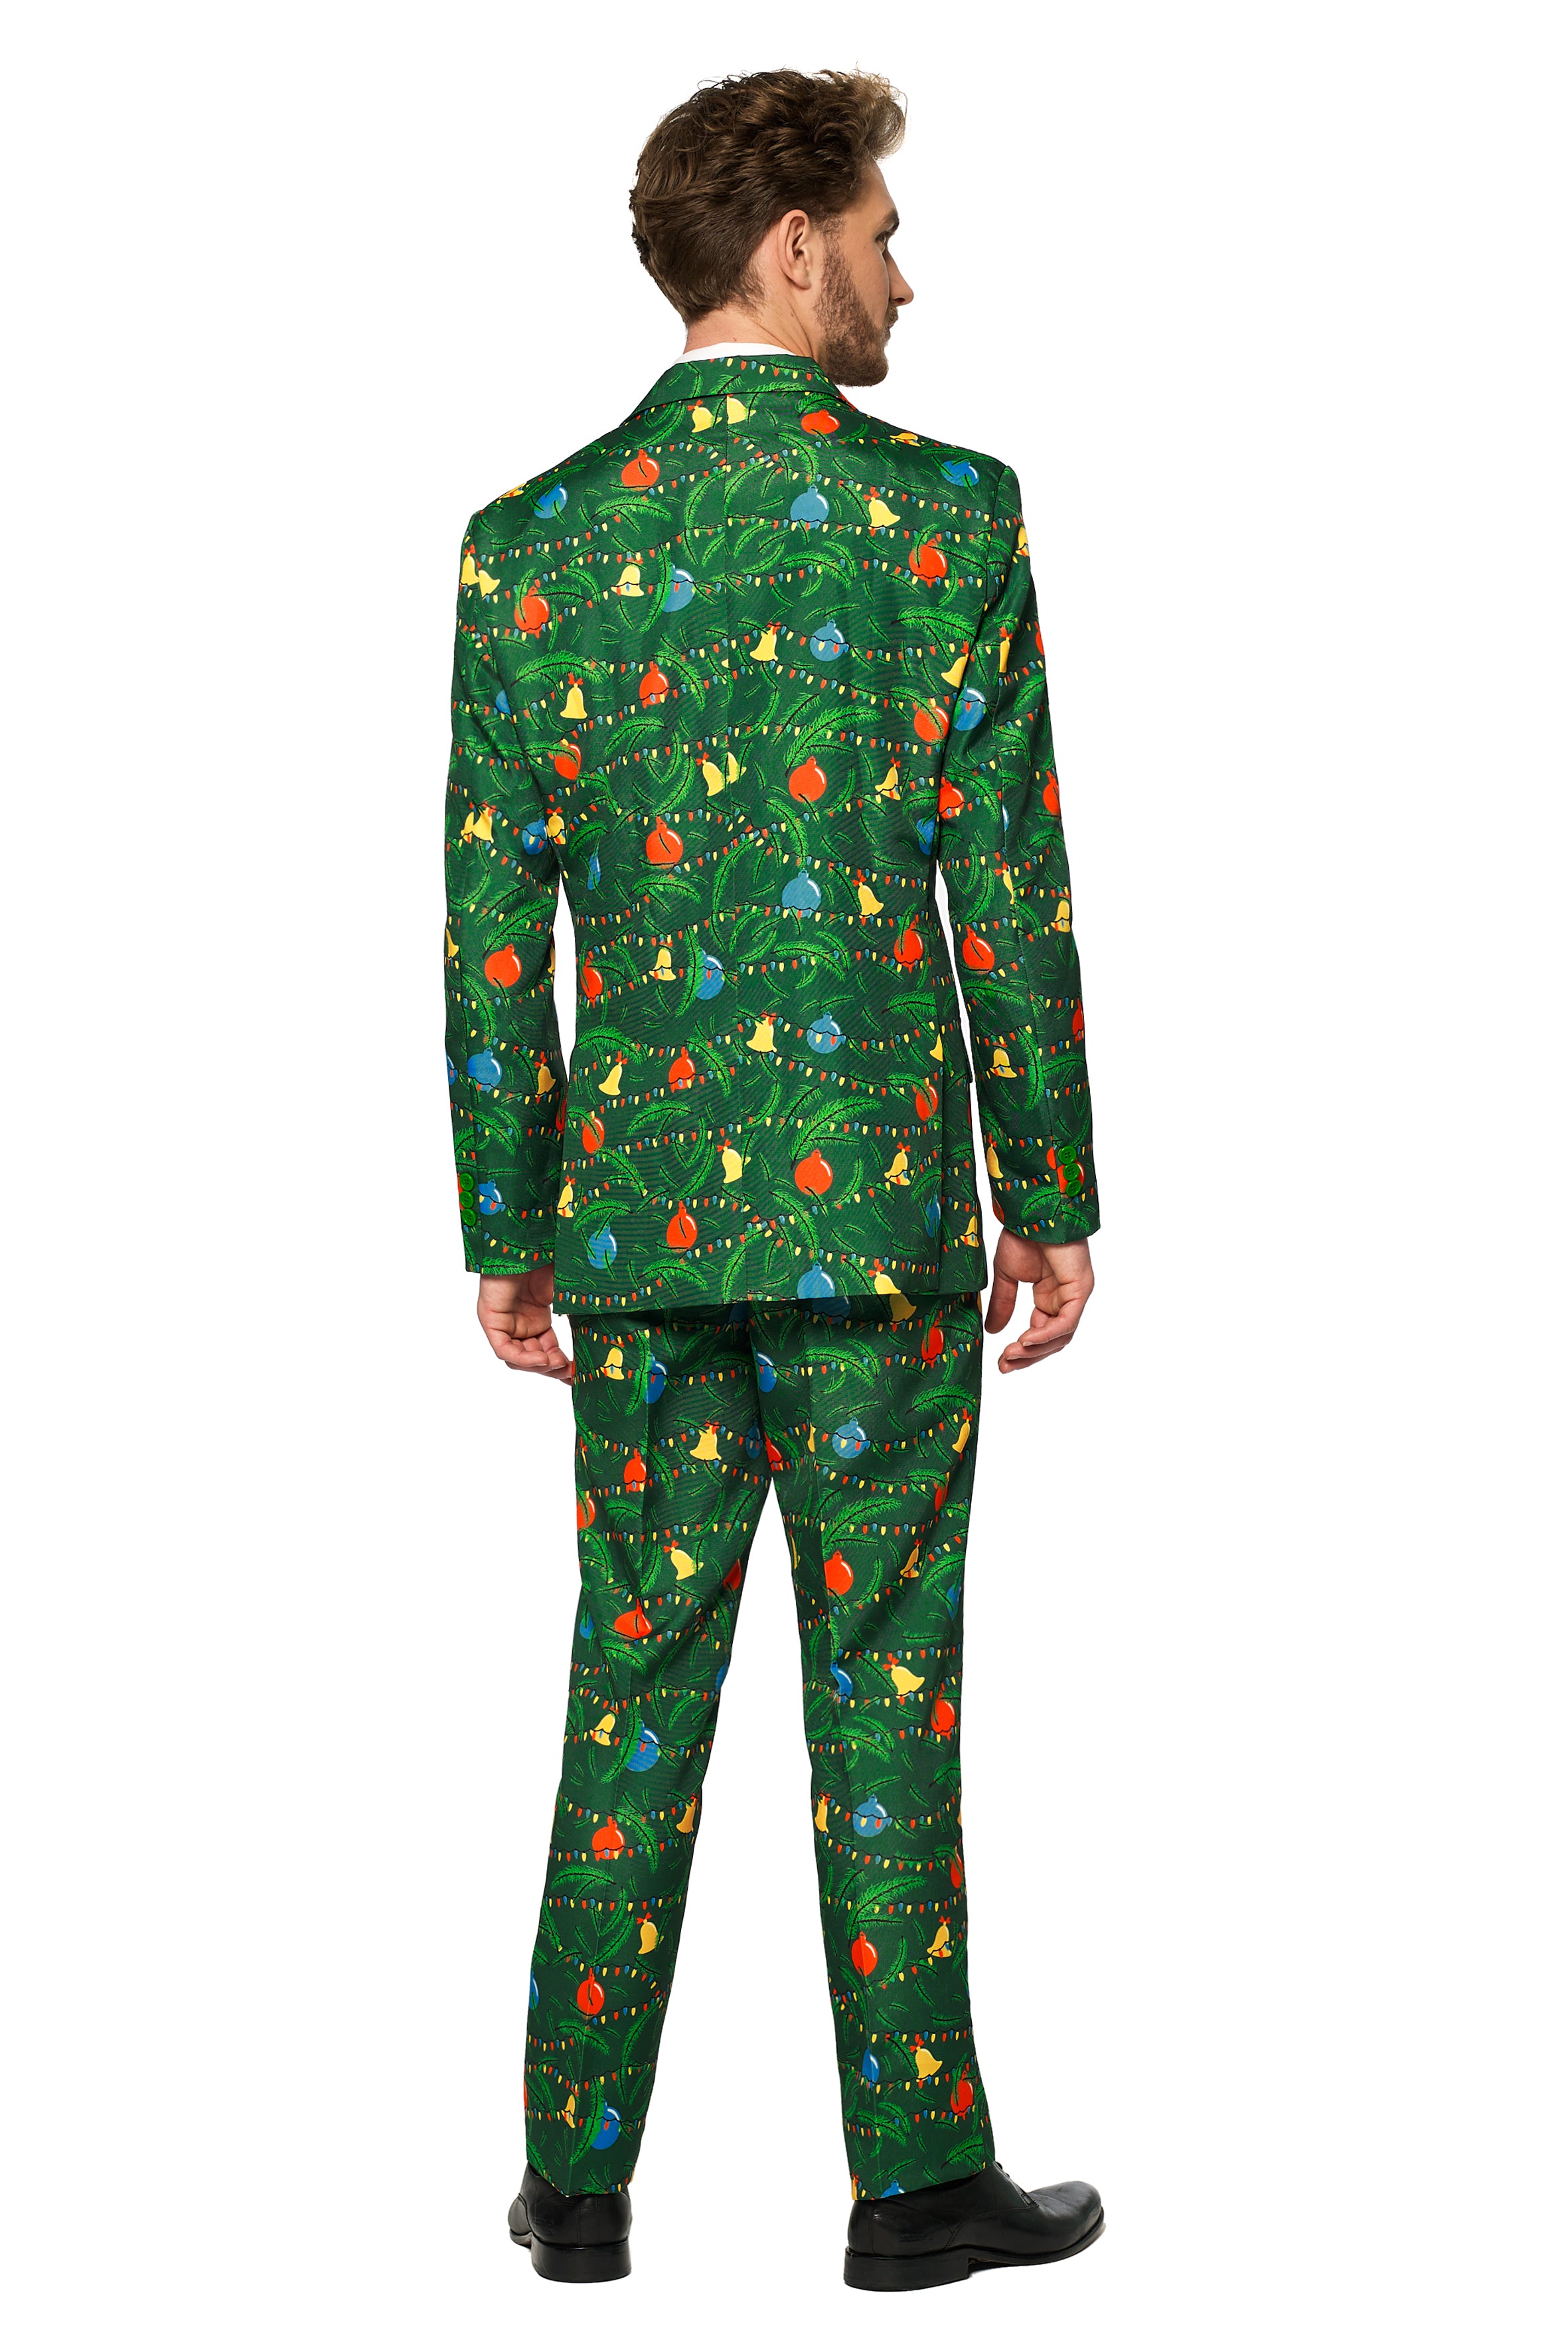 Costume Suitmeister Christmas Green Tree - Light Up